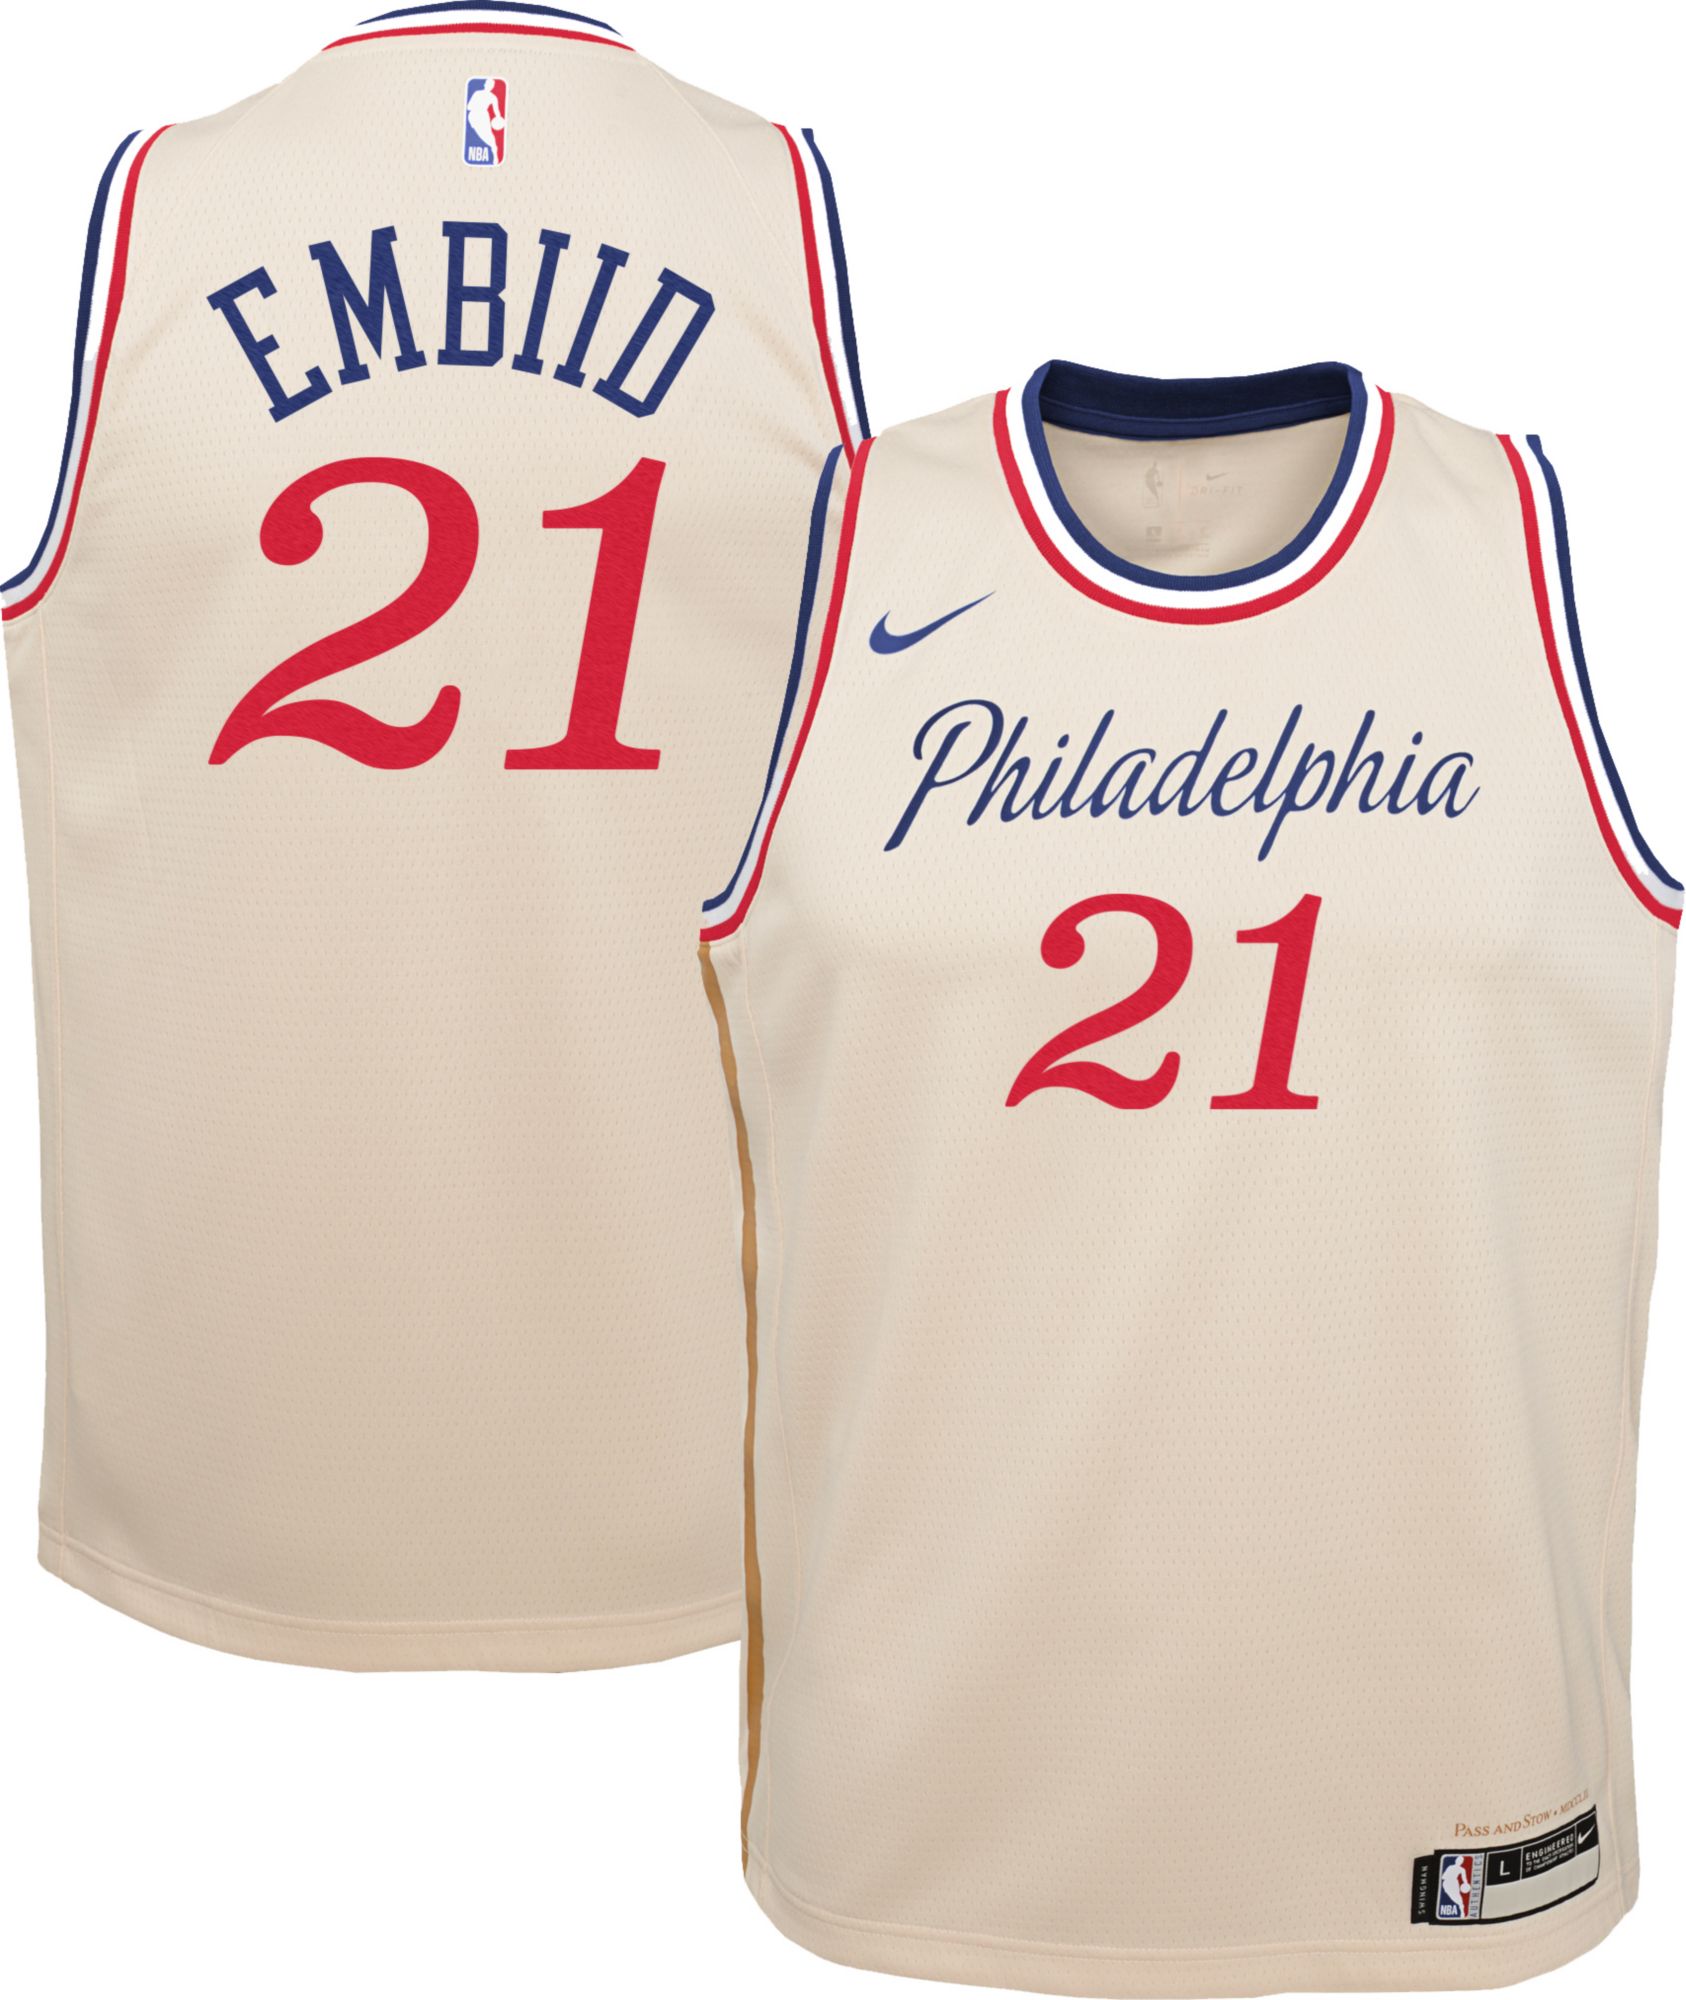 sixers city jersey